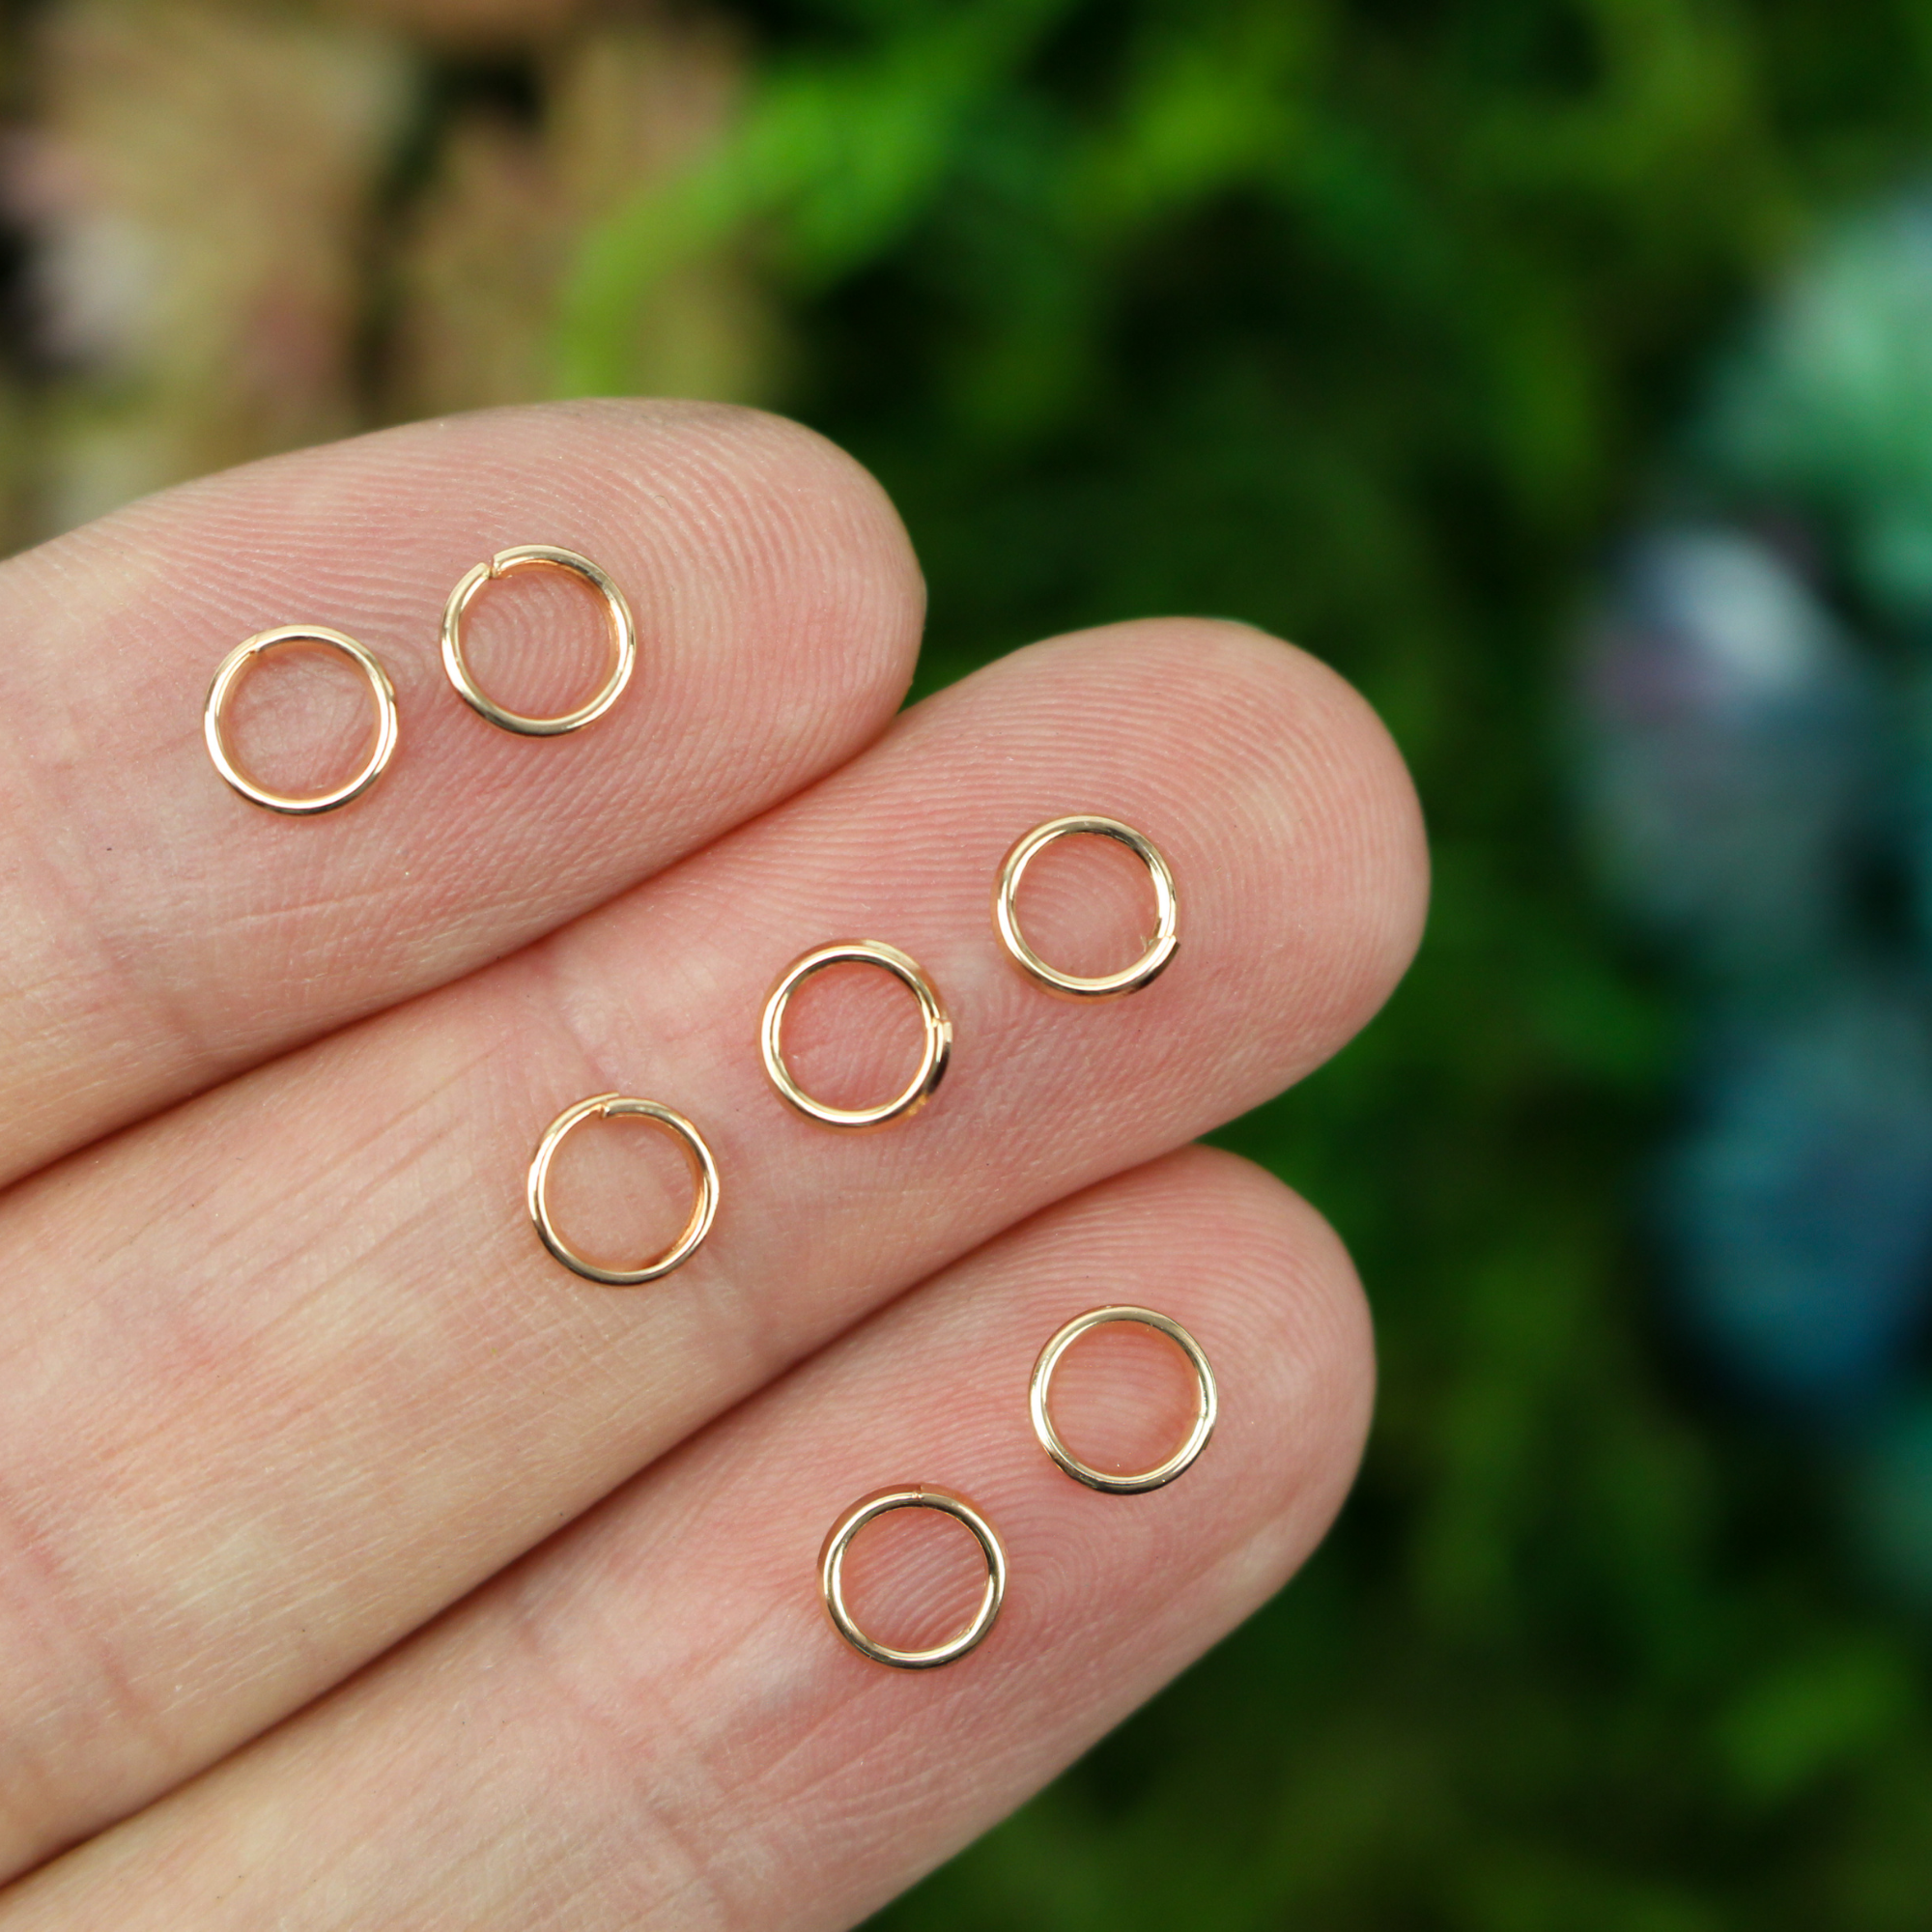 Rose Gold Jump Rings 5mm, 100pcs  Jewelry Making Supplies – Small